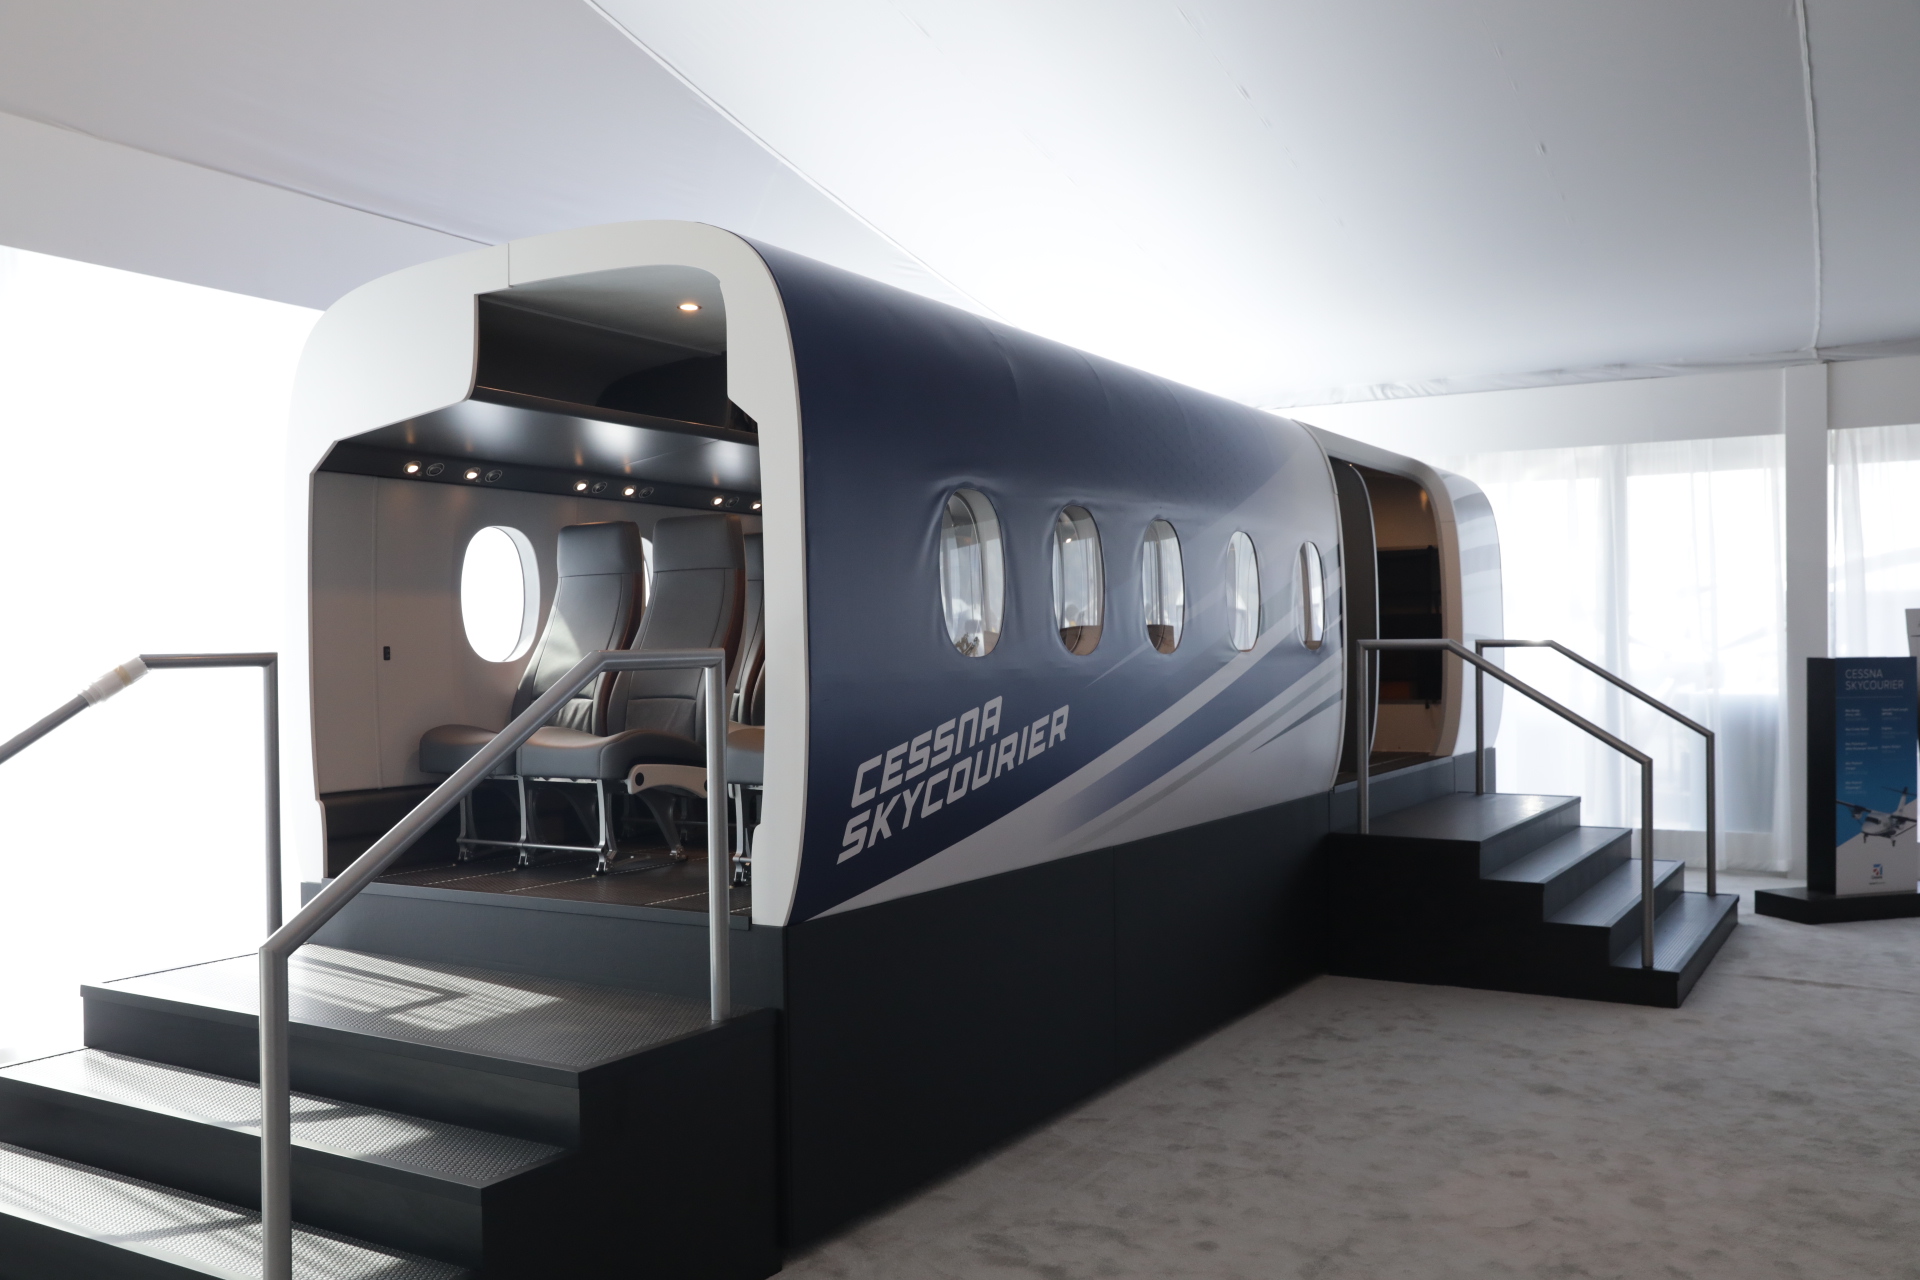 Textron Aviation debuts new full-scale Cessna SkyCourier mockup